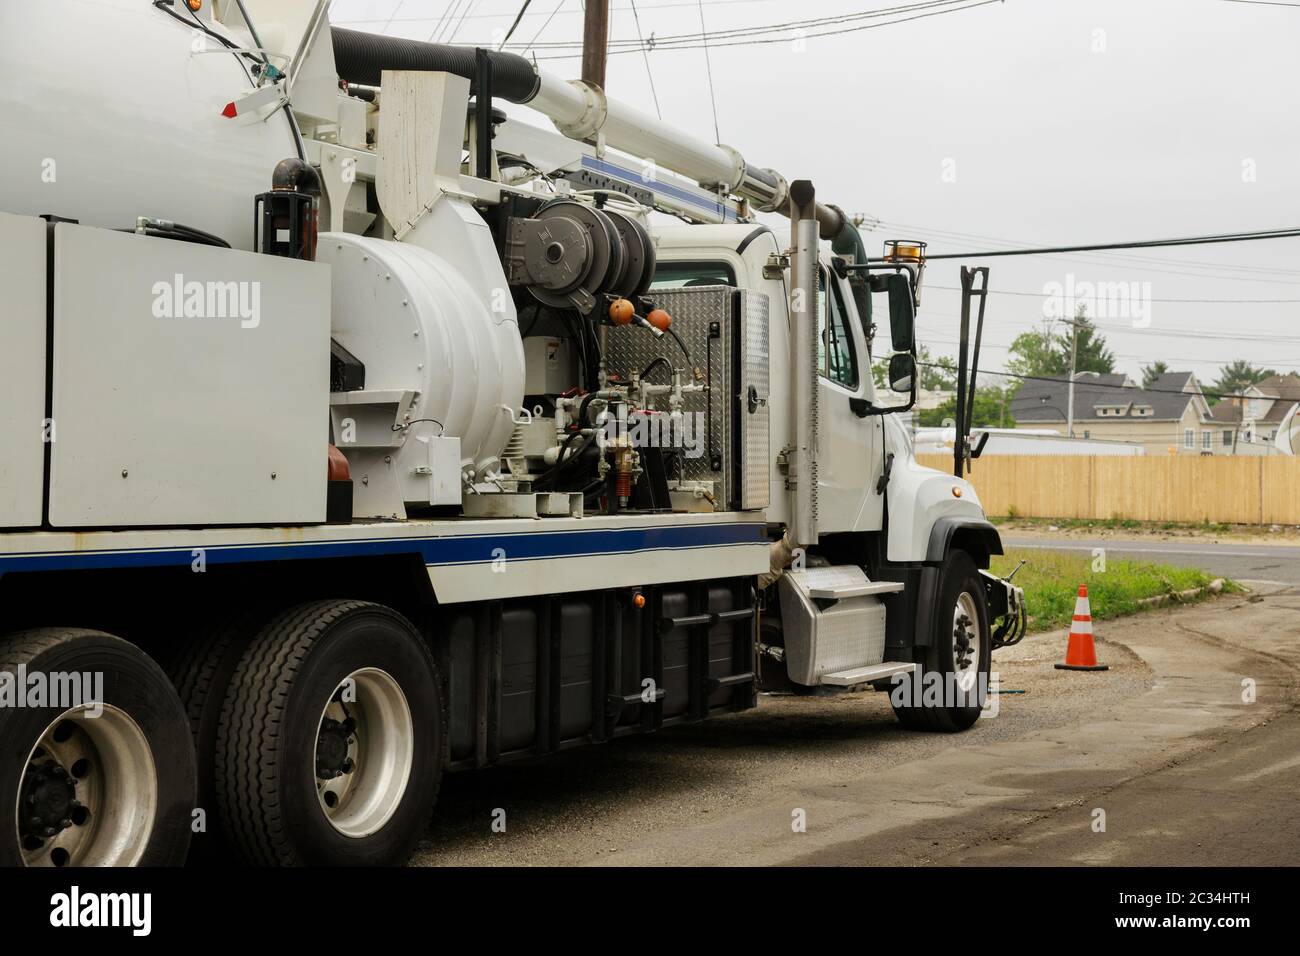 A specialized sewer cleaning machine works on a town street. Stock Photo